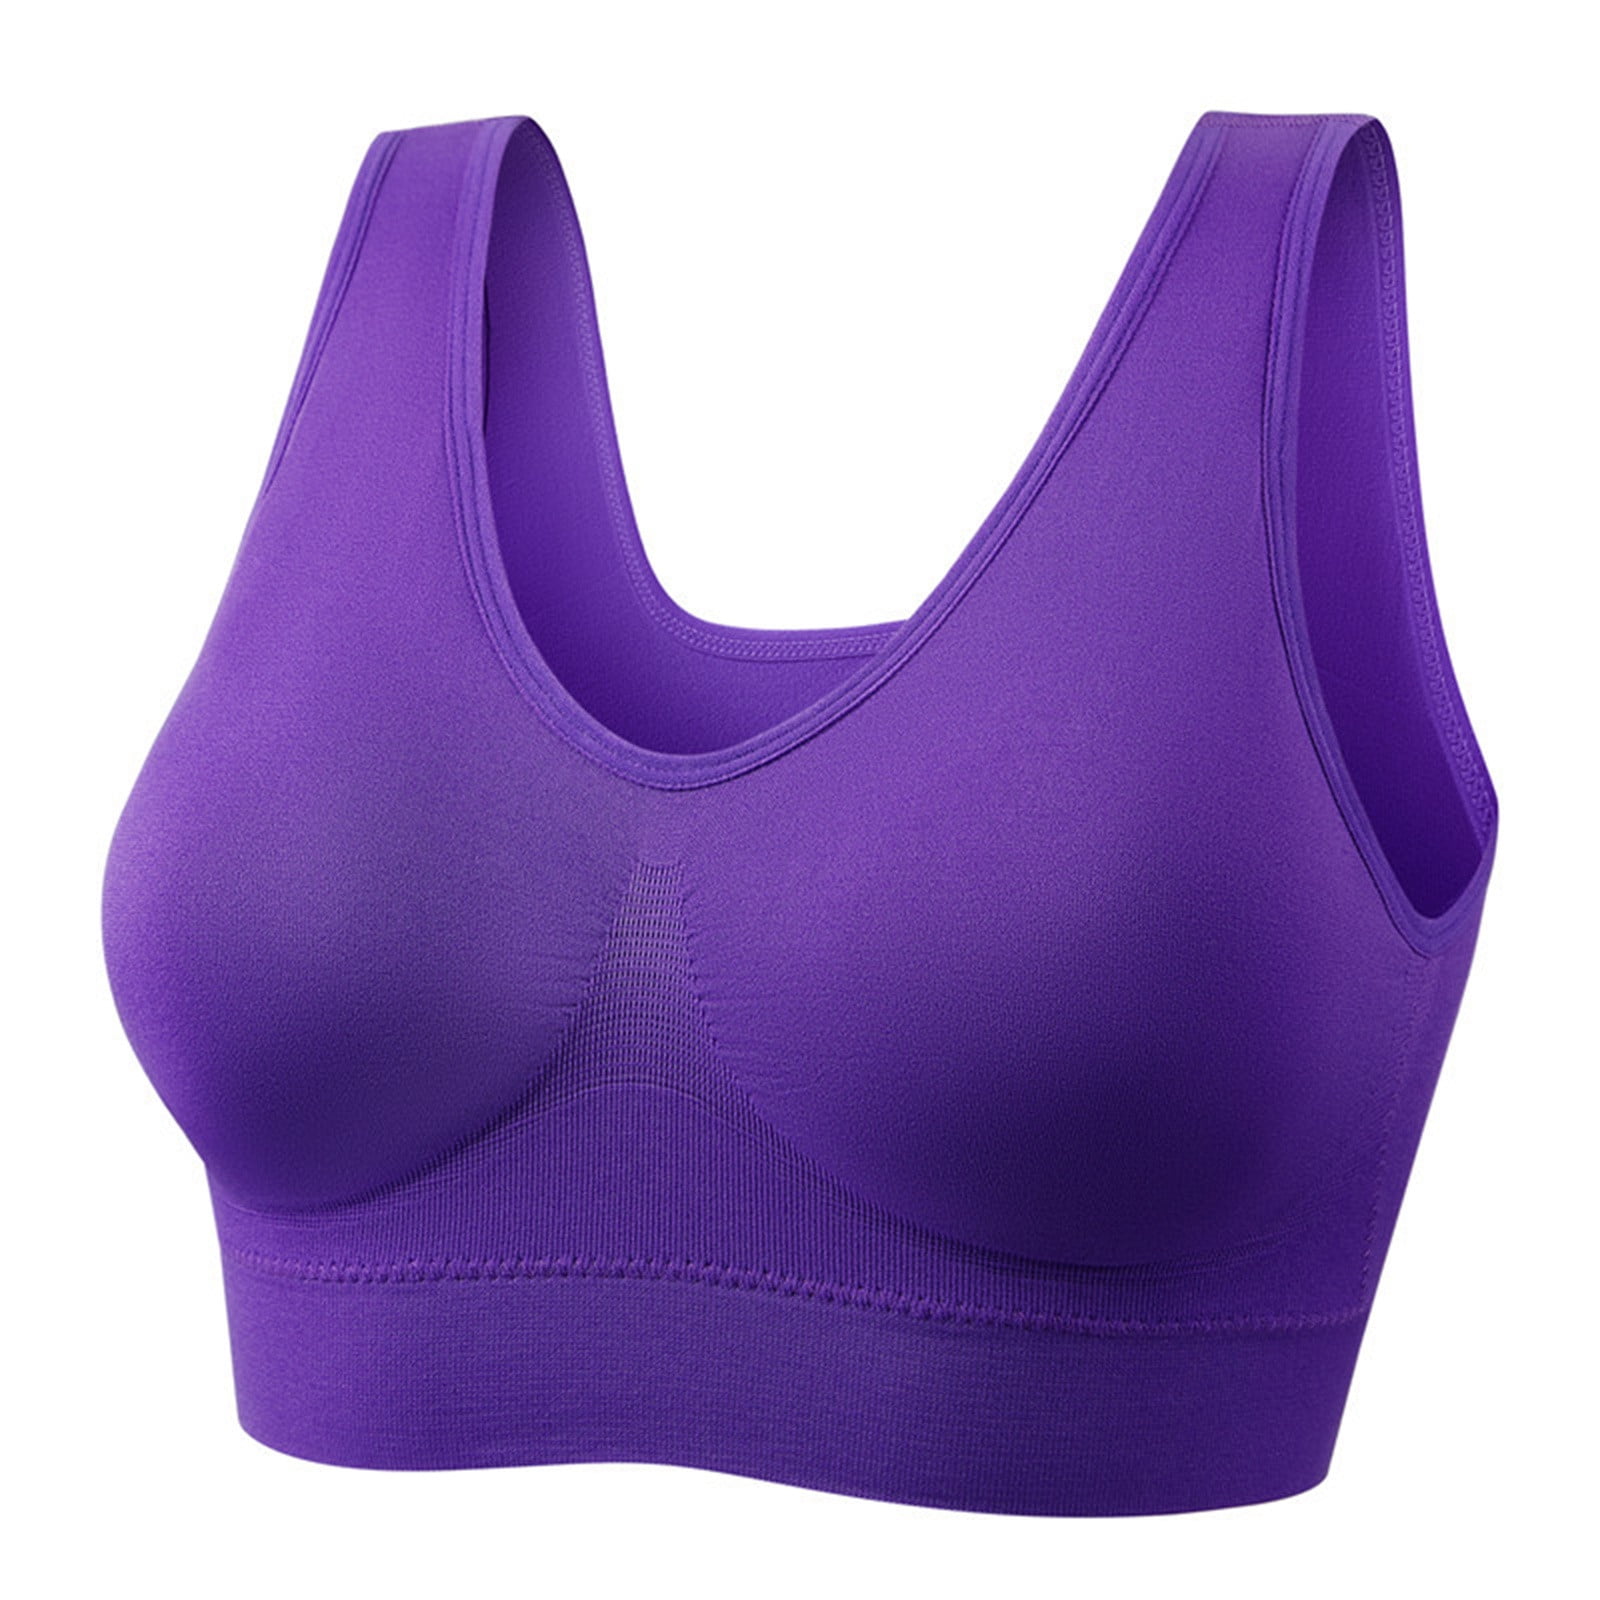 EHTMSAK Maternity Bras for Pregnancy Supportive Plus Size Workout